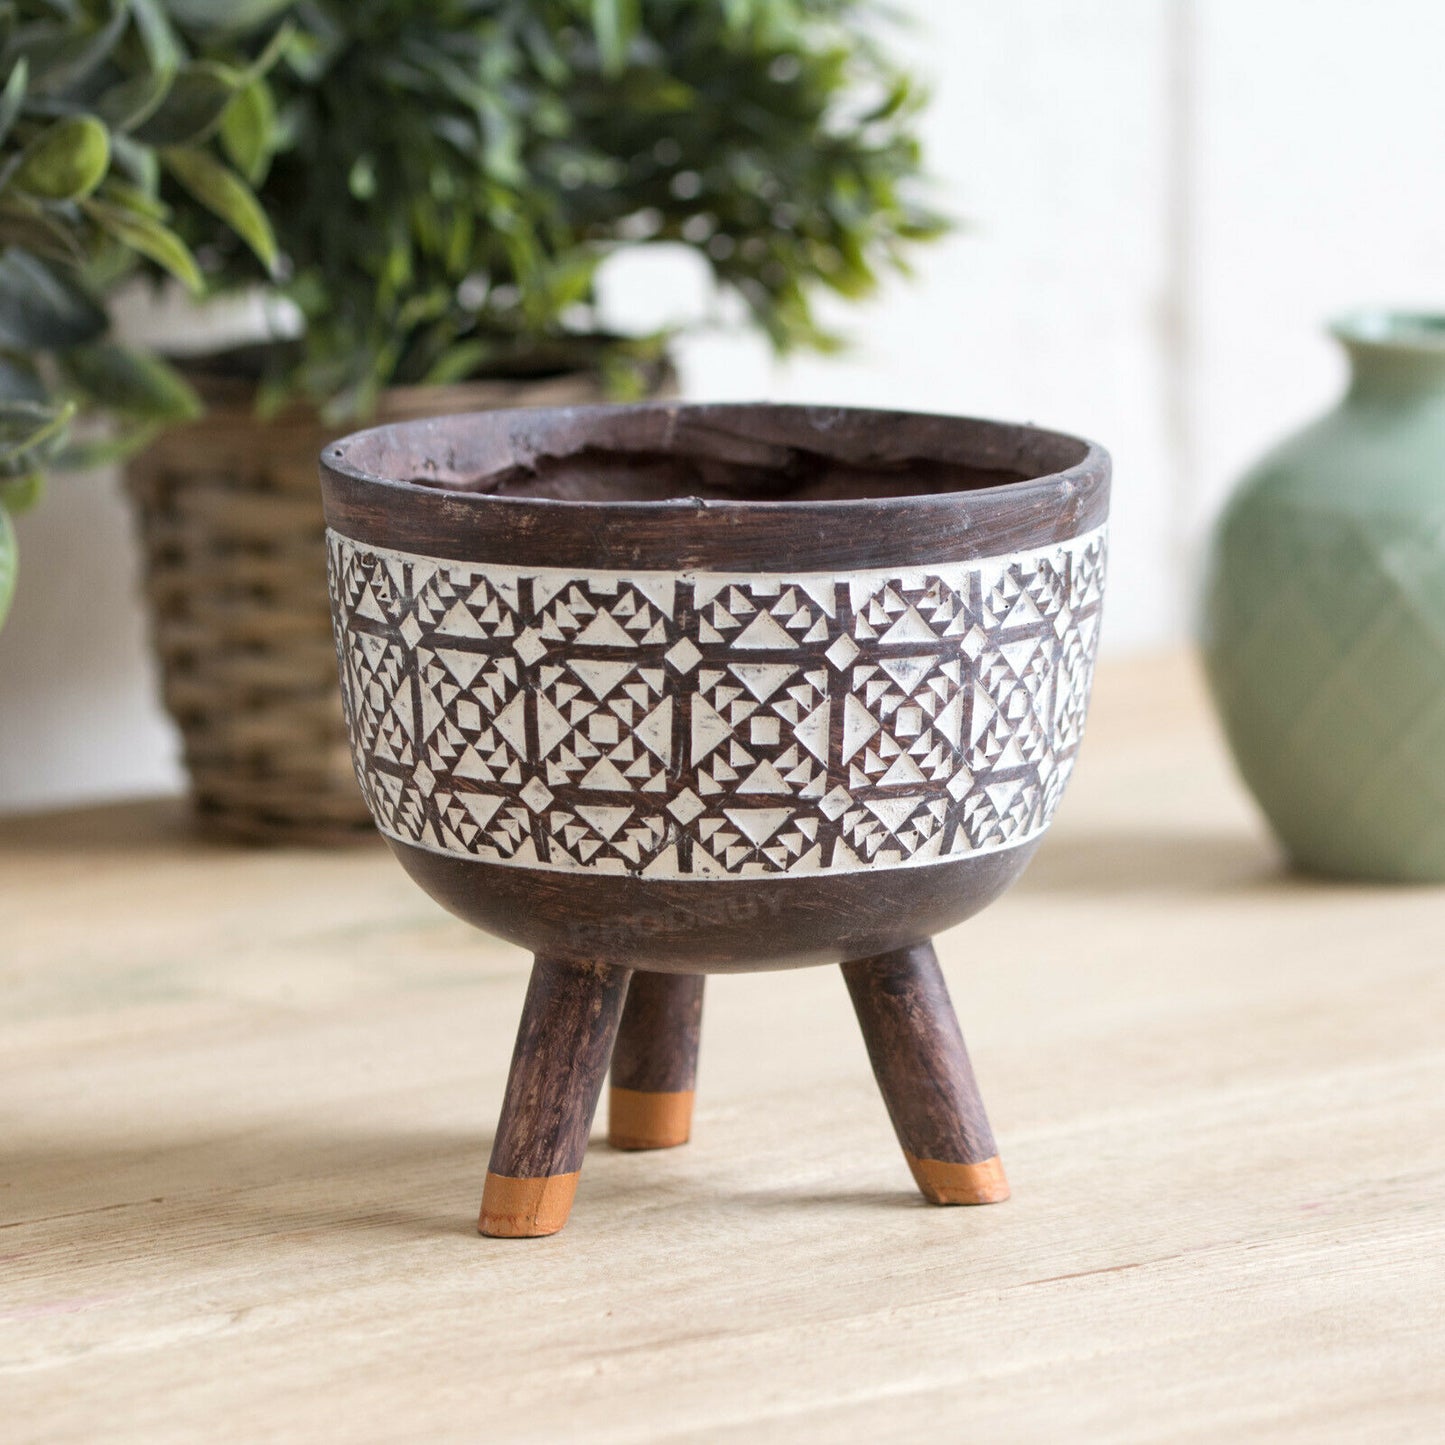 Small 12cm Indoor Plant Pot Stand with Legs